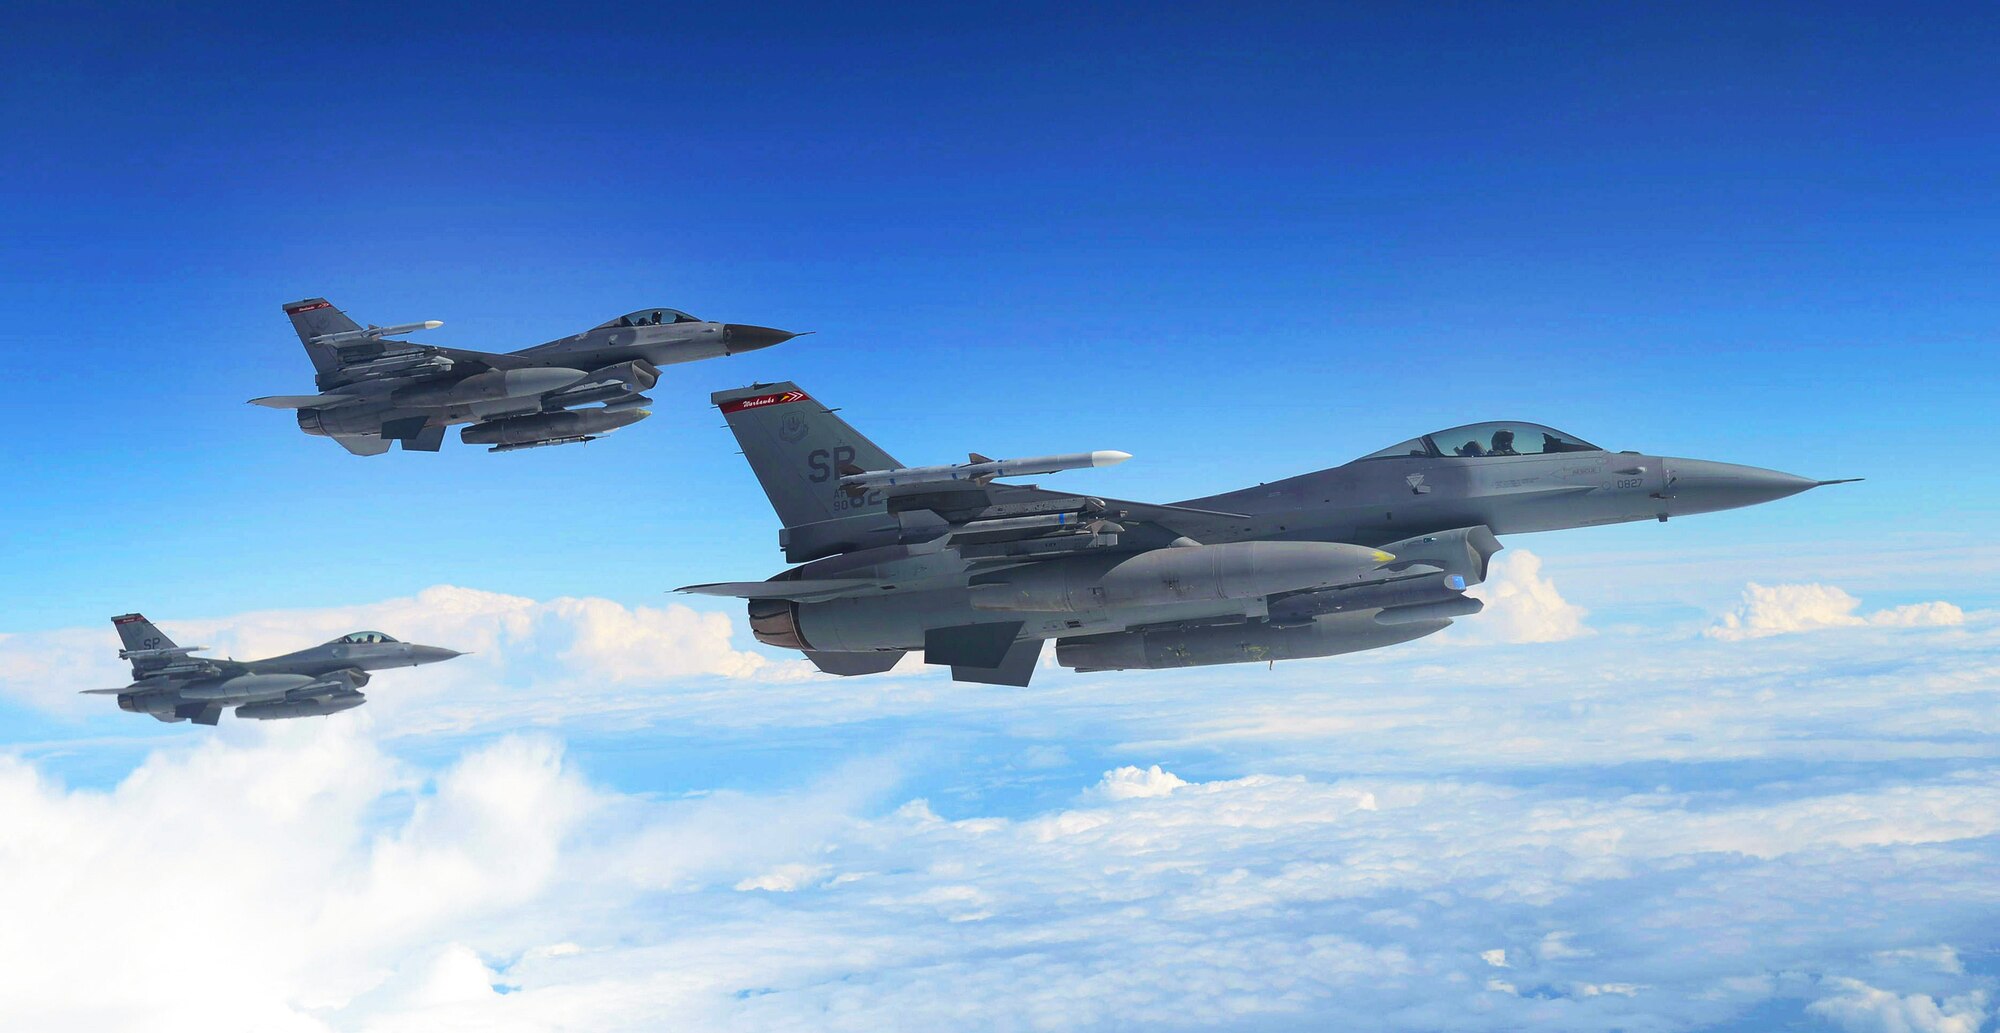 U.S. Air Force F-16 Fighting Falcons await refueling from a KC-135 Stratotanker assigned to the 351st Expeditionary Air Refueling Squadron-Poland June 13, 2014, during a Baltic Operations Exercise mission over Germany. For BALTOPS, the U.S. Air Force is providing fighter aircraft for maritime interdiction and dissimilar air combat training, as well as air refueling support. (U.S. Air Force photo/Airman 1st Class Kyla Gifford/Released)